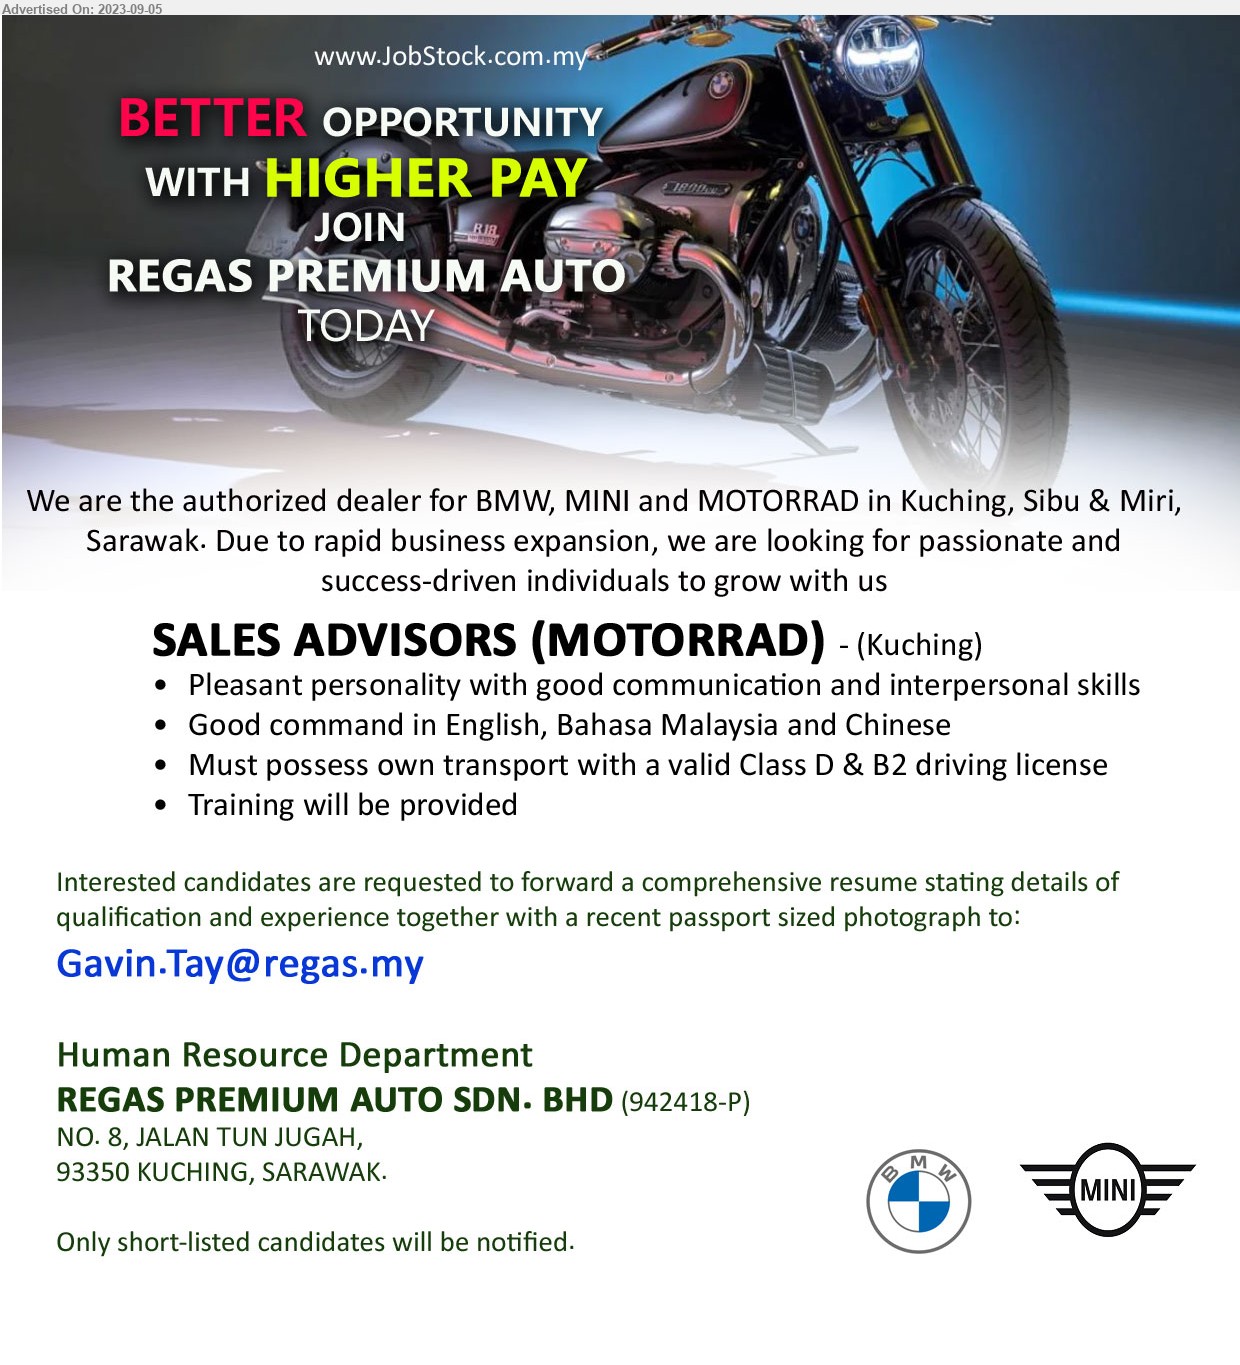 REGAS PREMIUM AUTO SDN BHD - SALES ADVISORS (MOTORRAD) (Kuching), Pleasant personality with good communication and interpersonal skills,...
Email resume to ...
